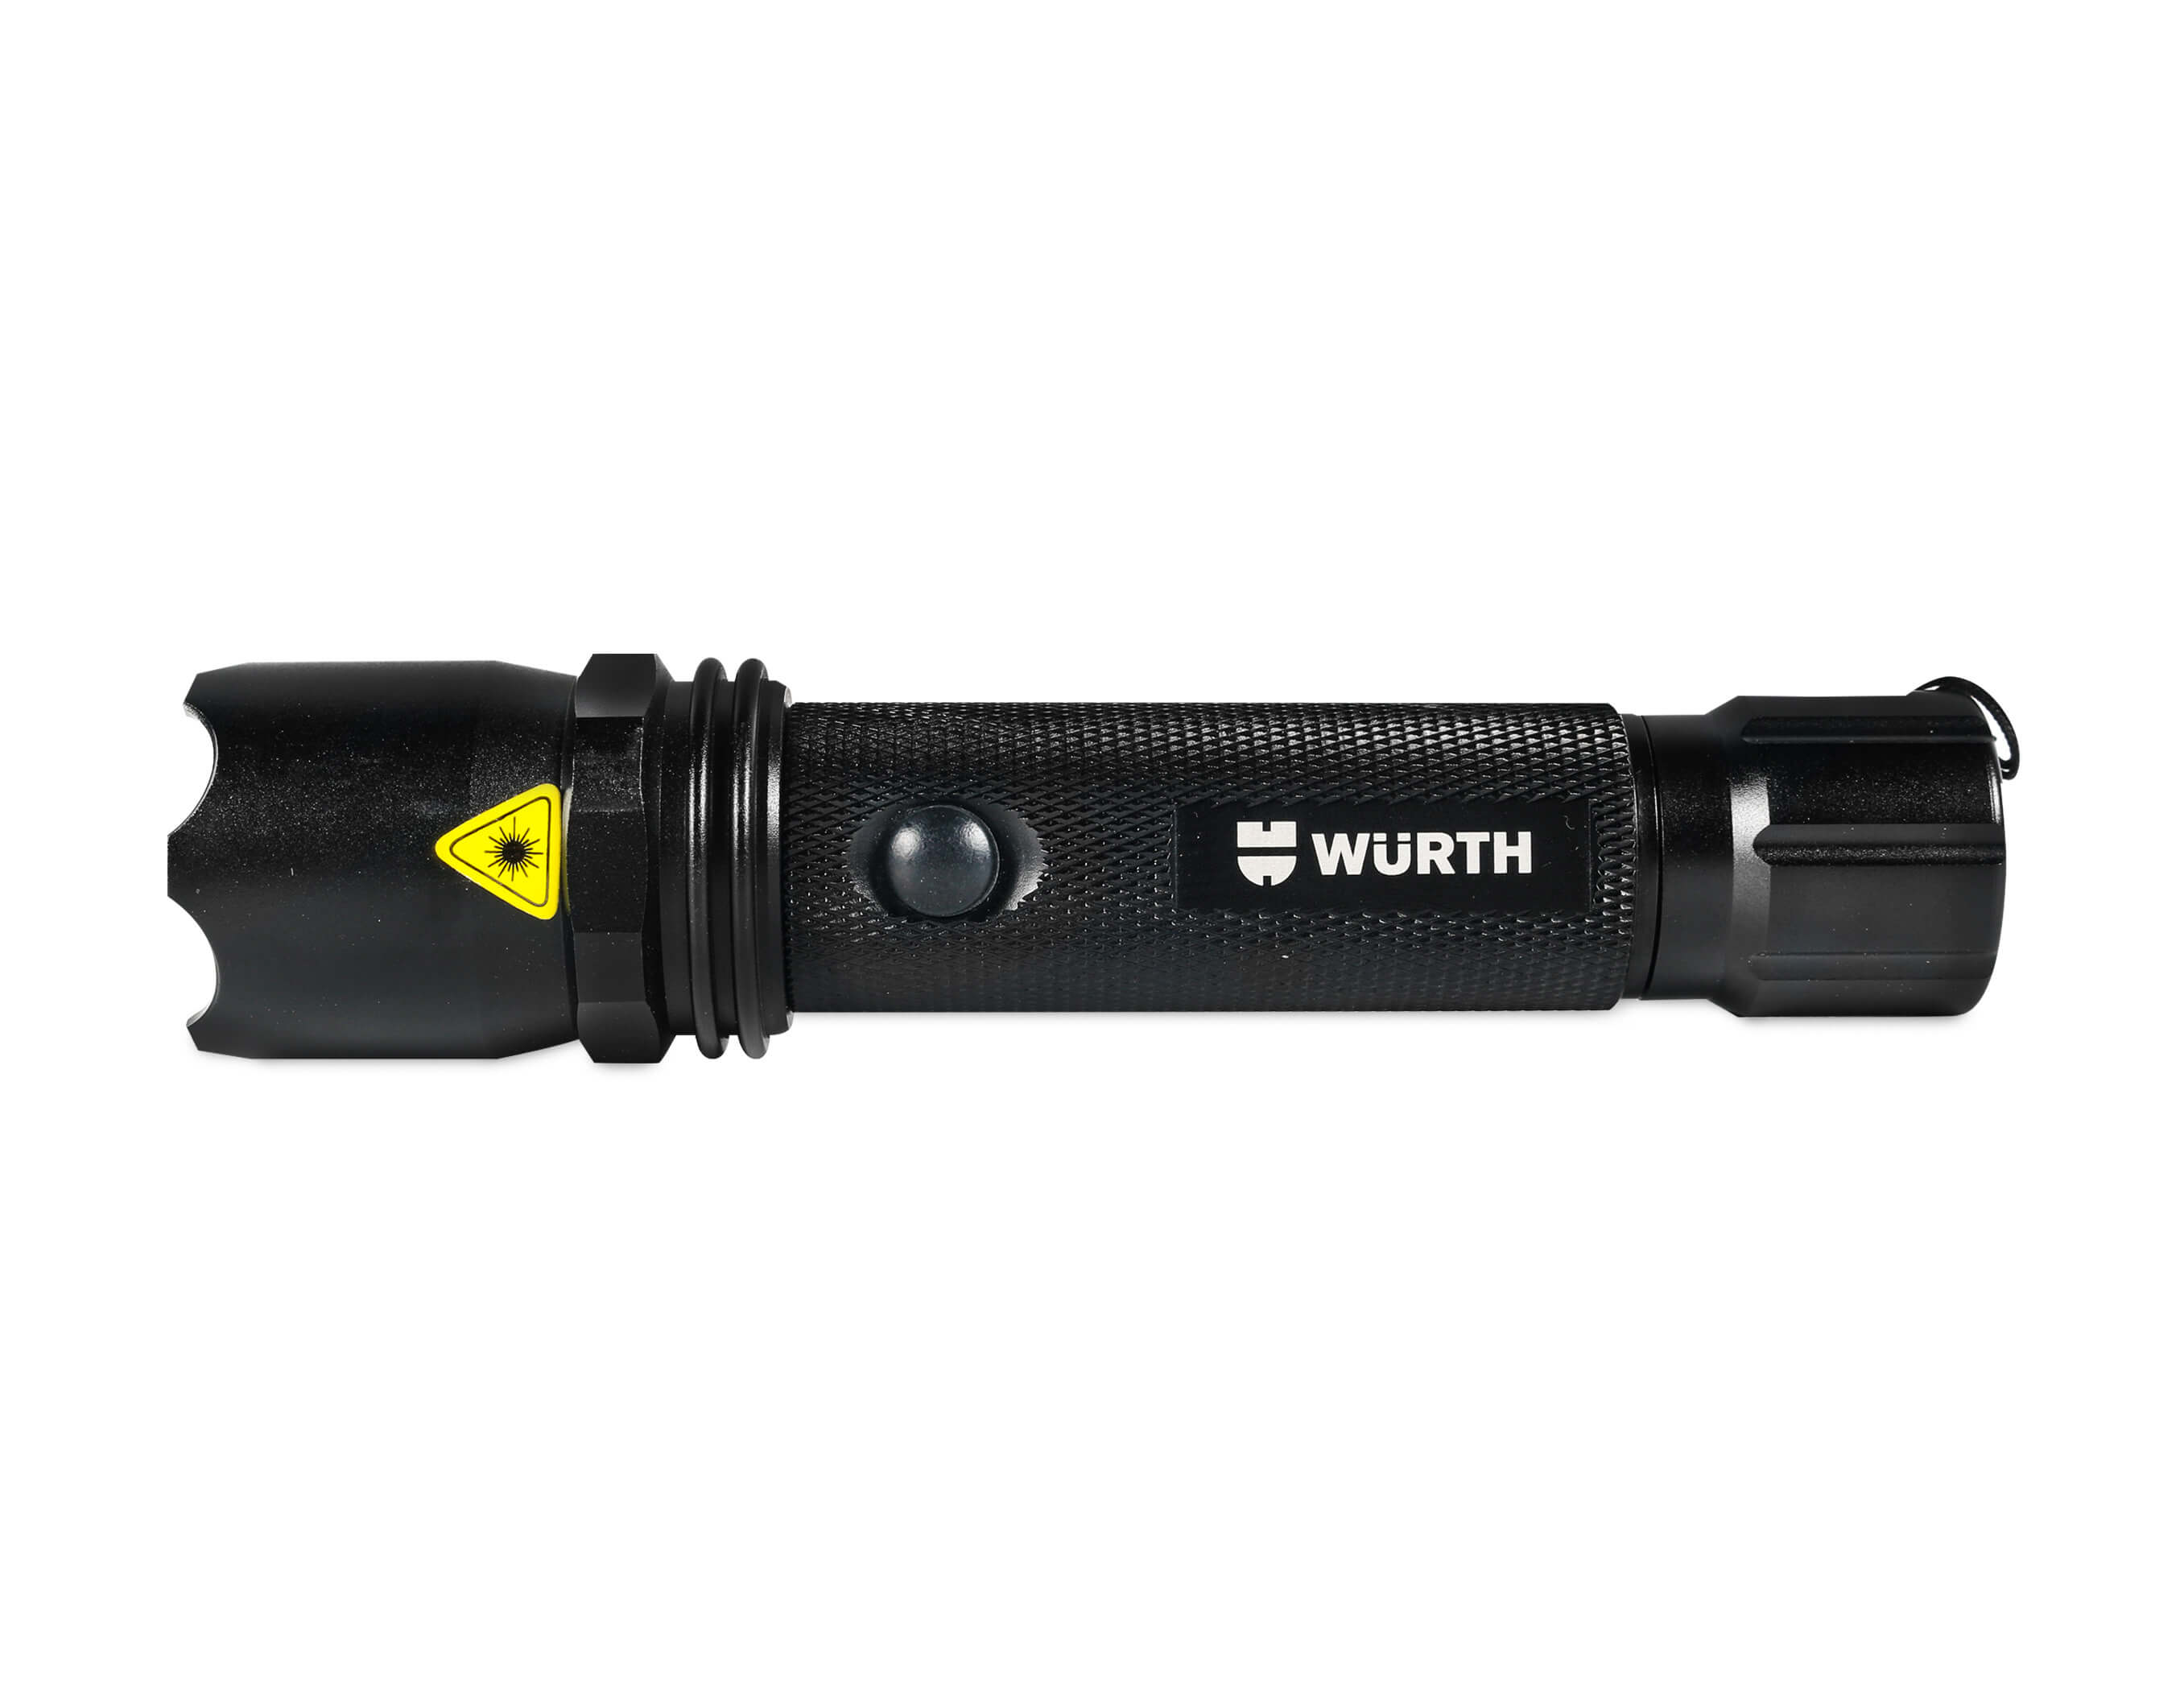 RECHARGEABLE POWER LED FLASHLIGHT